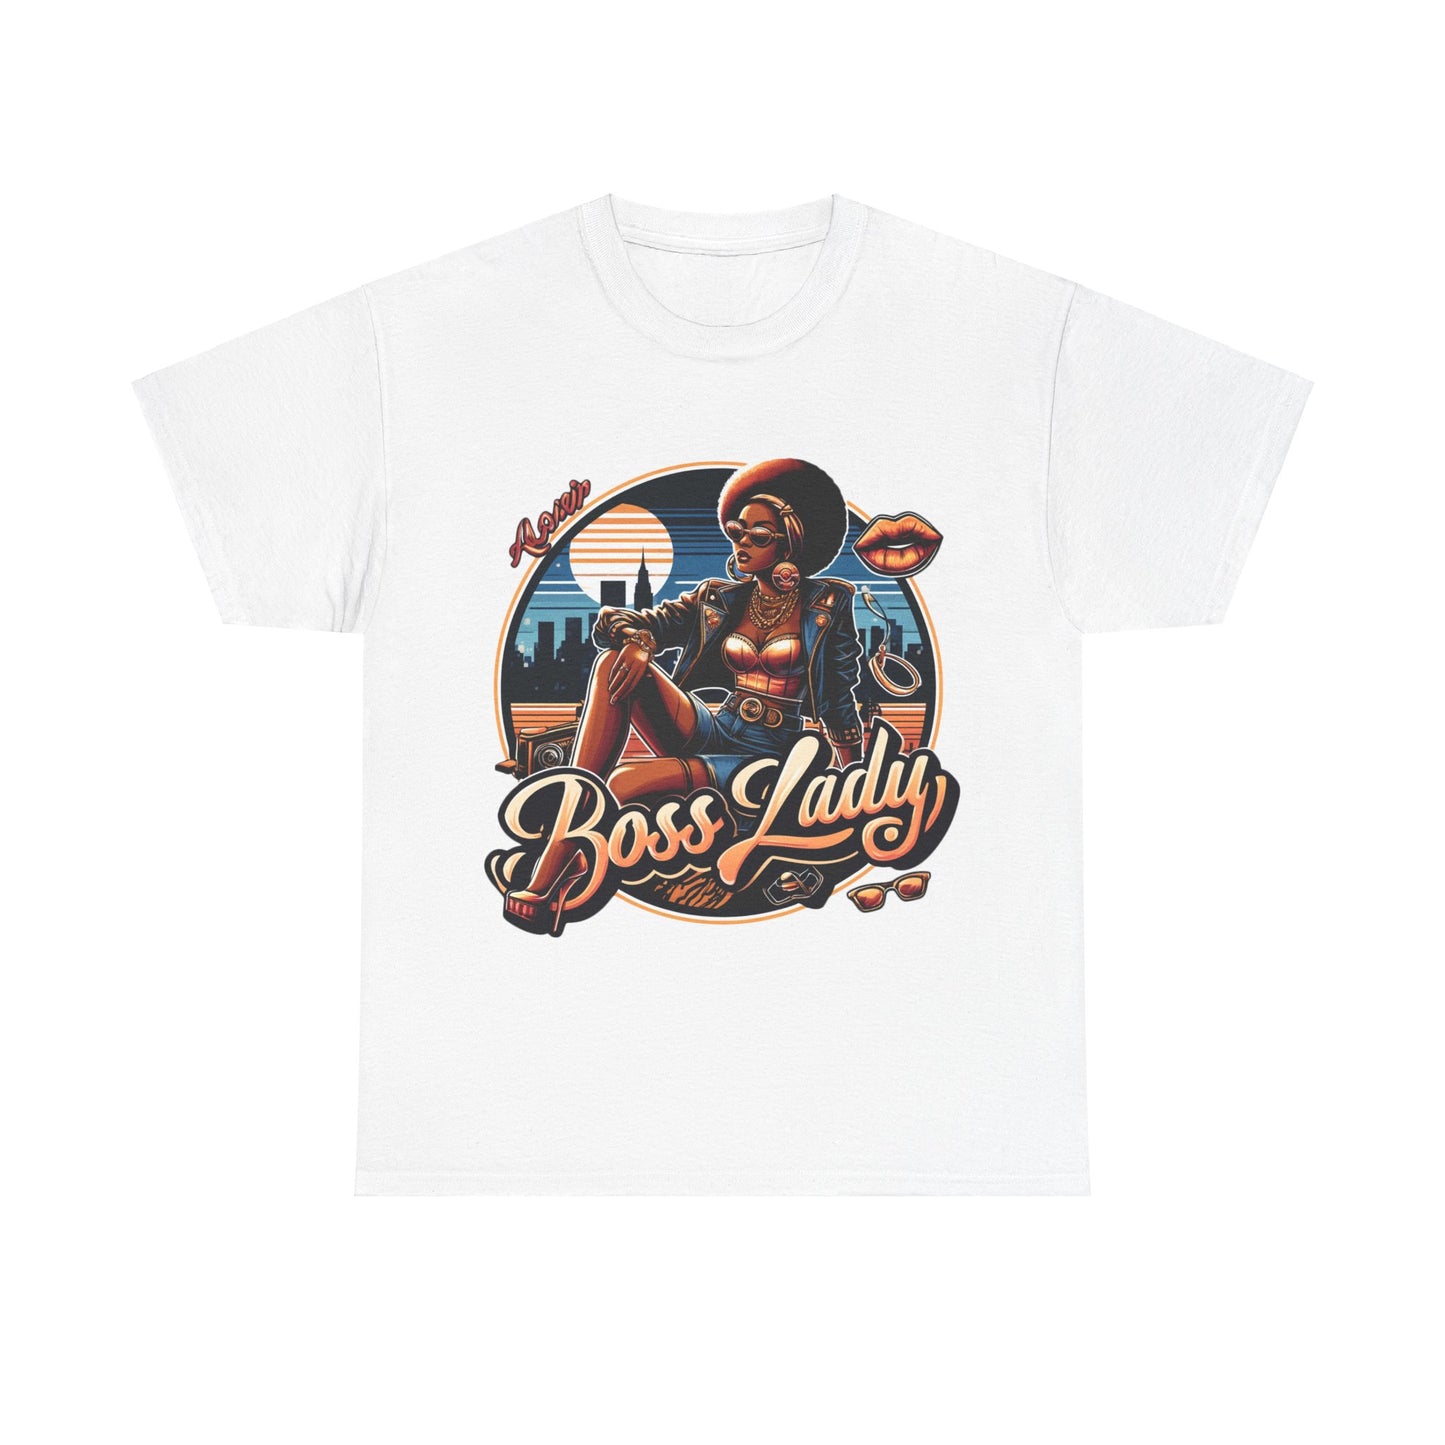 Buy 'Boss Lady' T-Shirt: Unleash Empowerment with Pin-Up Style Streetwear – Bold & Resilient Fashion